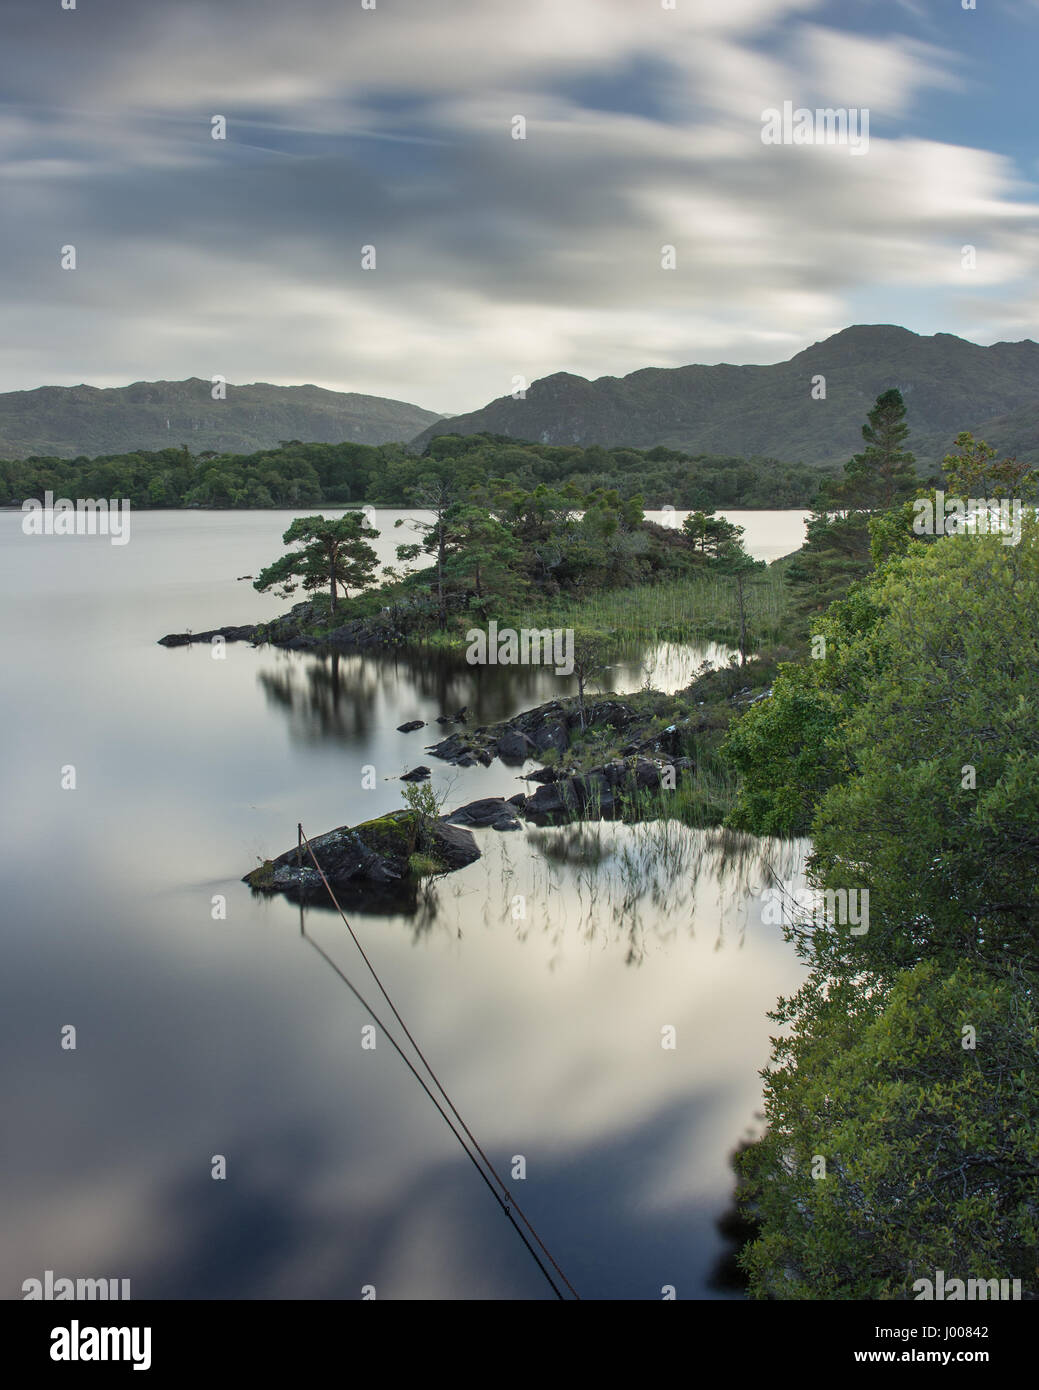 Small native trees stand on the rocky shores of Muckross Lake in the Killarney National Park in Ireland's County Kerry. Stock Photo